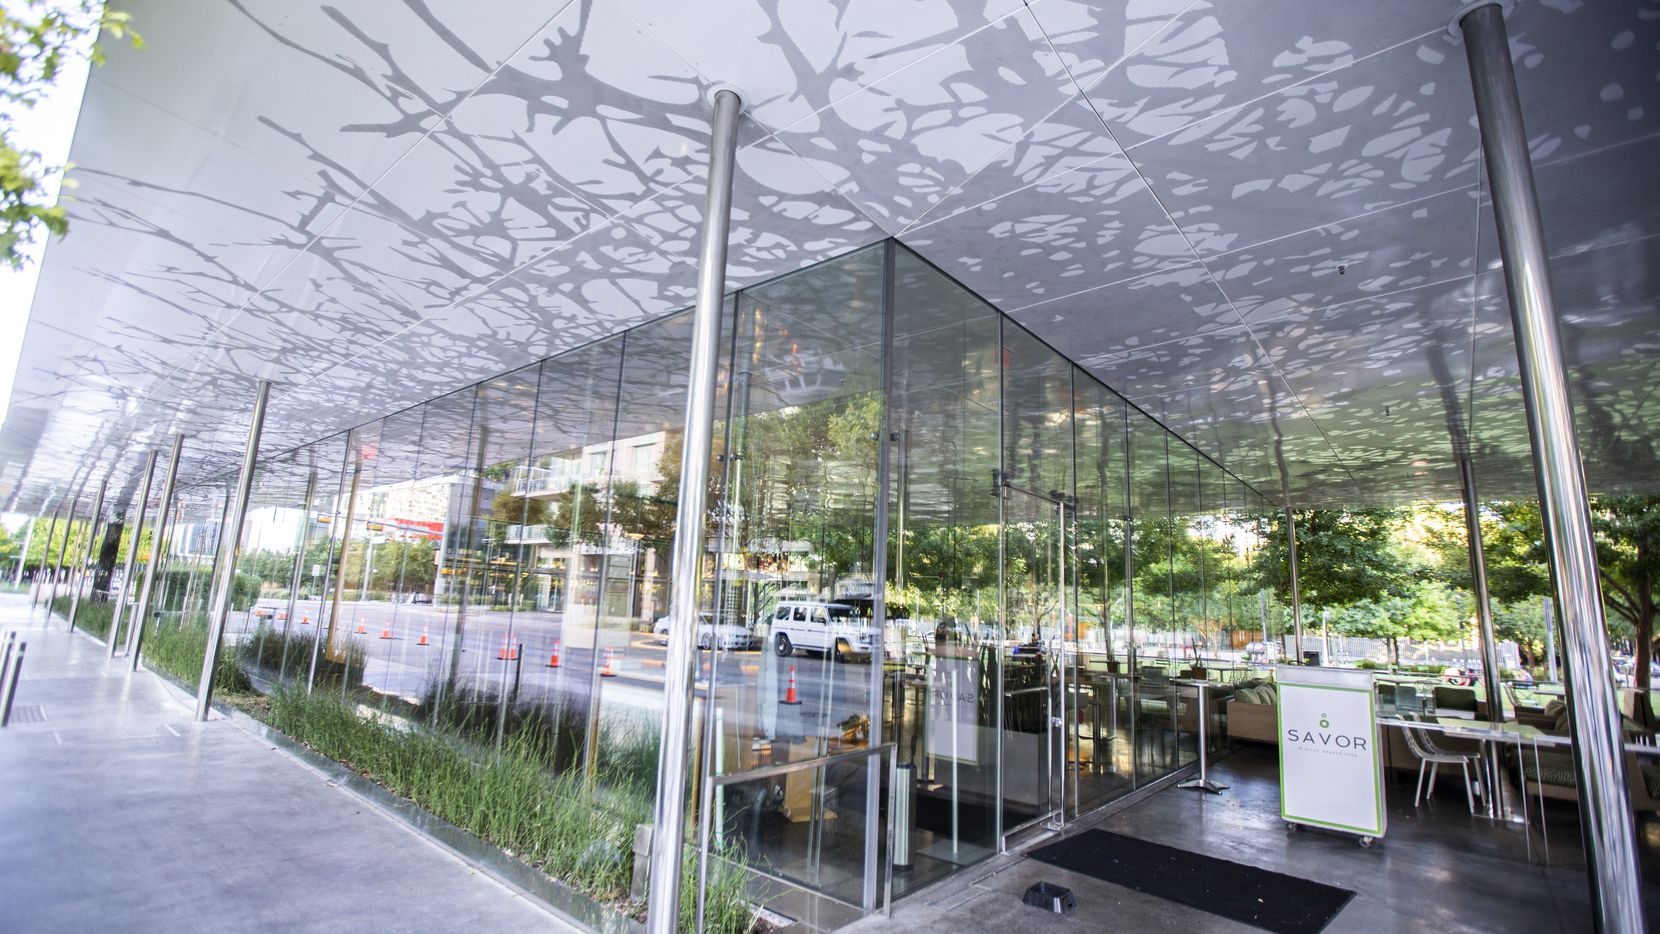 Savor in Klyde Warren Park closes Aug. 23, 2020. The park "really relies on earned revenue...